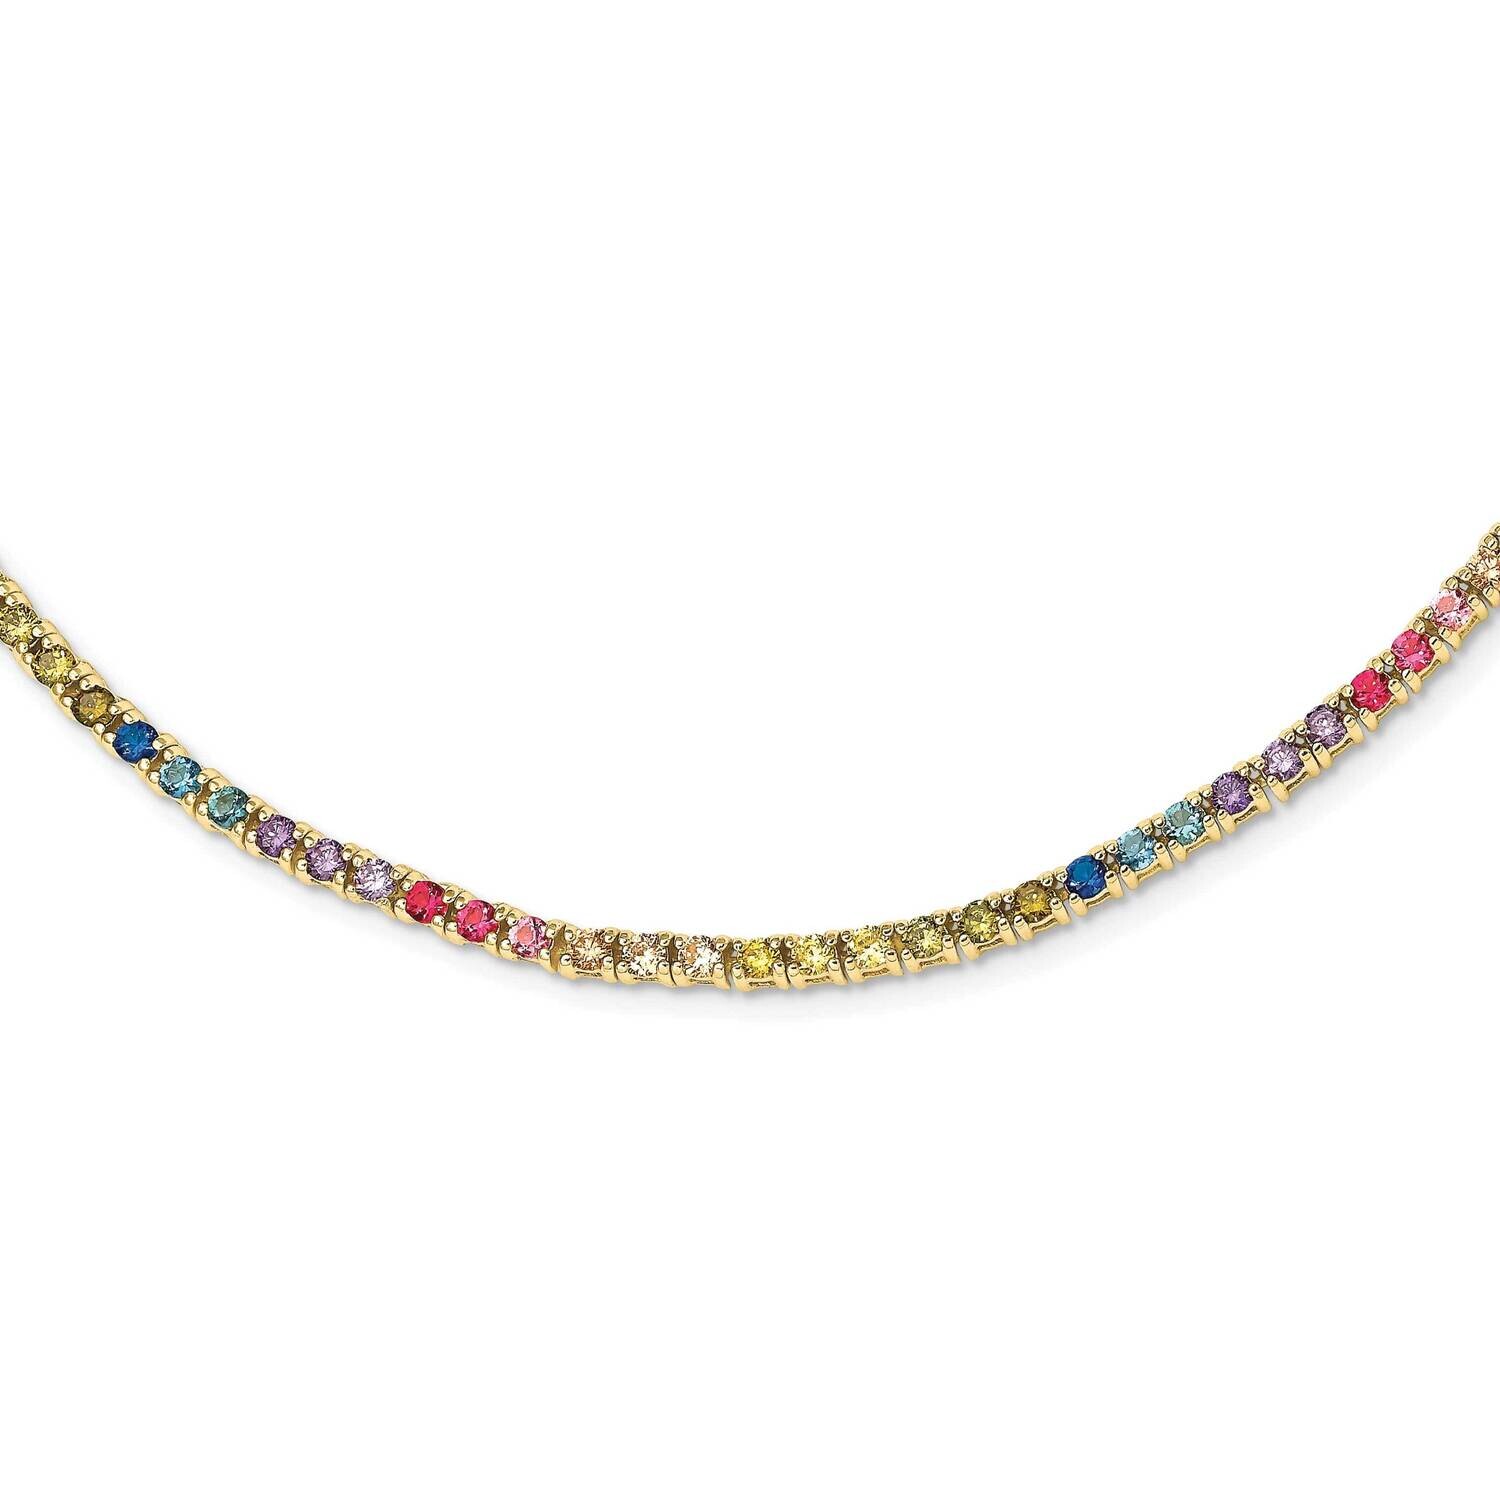 Prizma Flash Gold-Plated 18 Inch 3mm Colorful CZ Necklace Sterling Silver Gold-Tone 14k QG5051GP-18